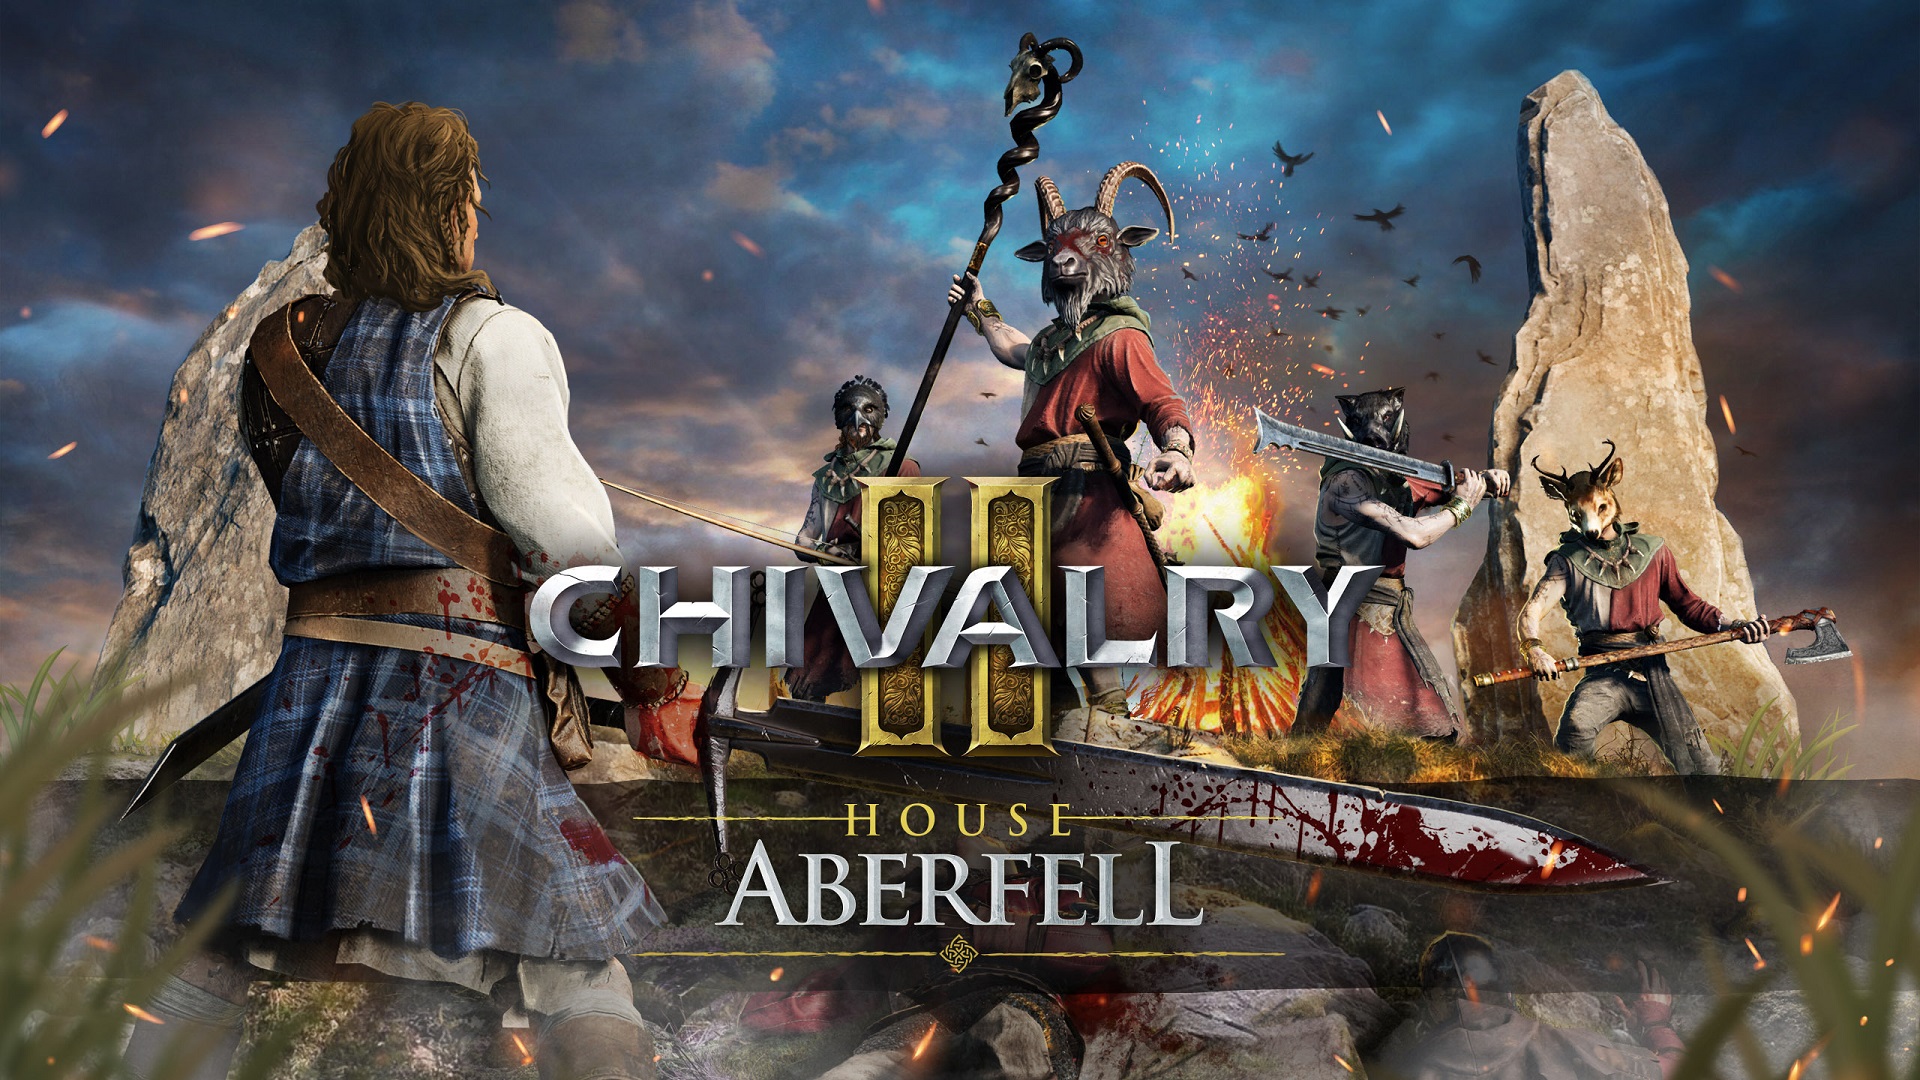 Chivalry 2 gets playable druids and more in House Aberfell update